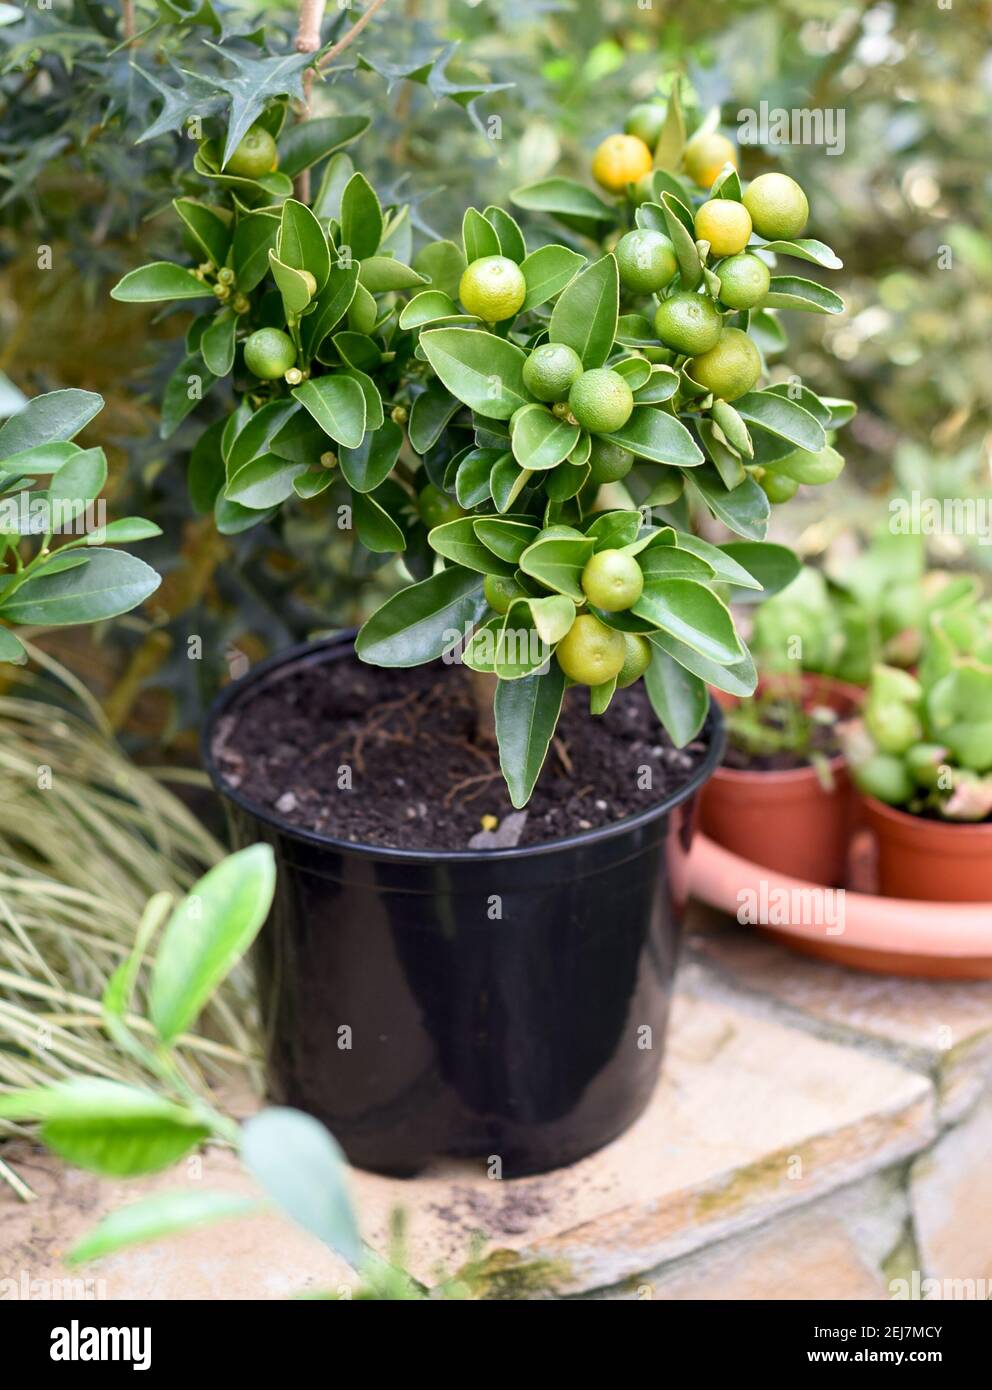 Calamansi also known as calamondin, growing in a pot Stock Photo